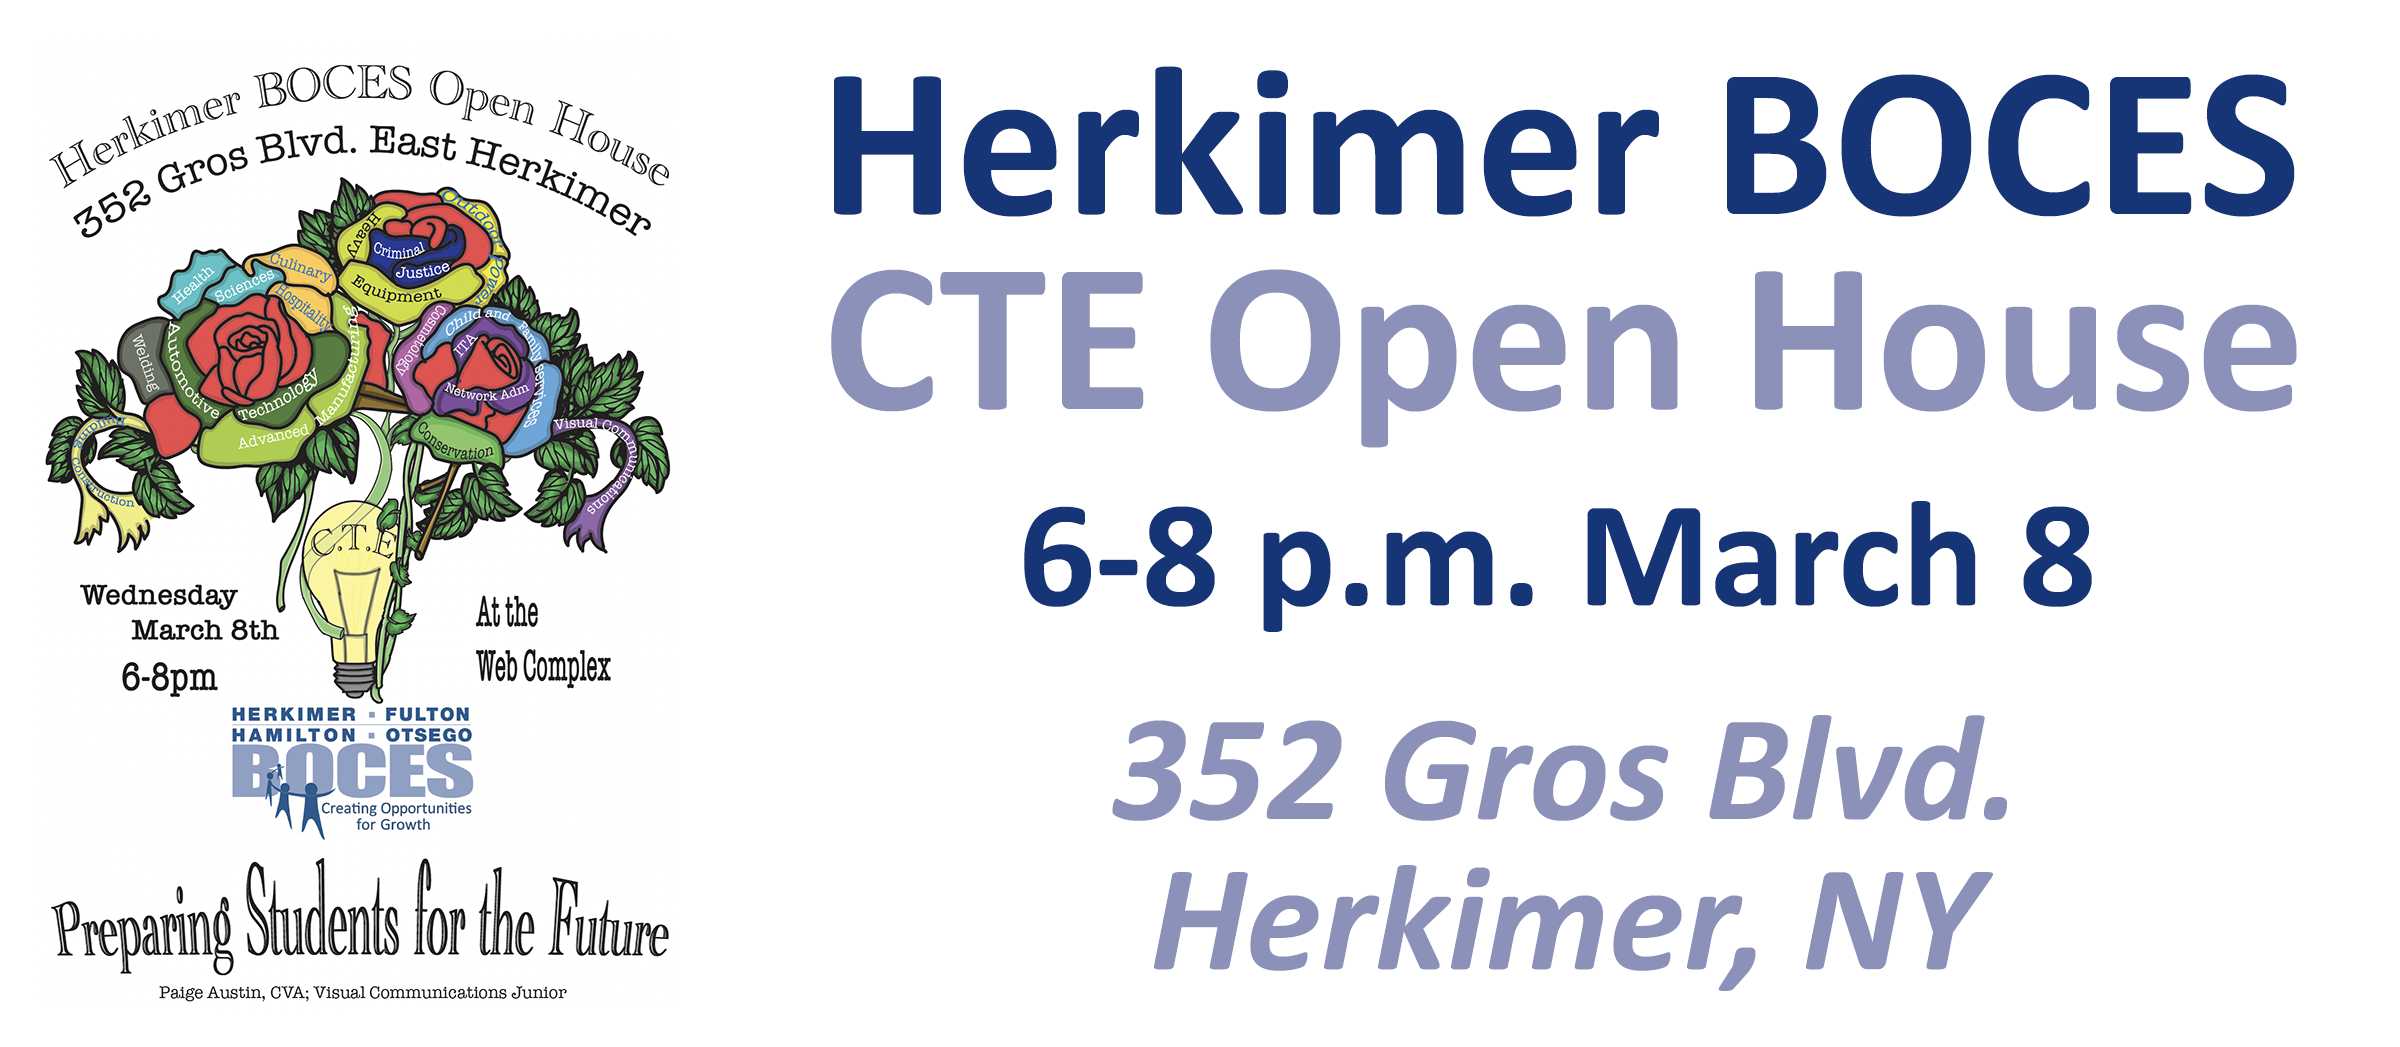 Herkimer BOCES CTE Open House 6-8 p.m. March 8 with logo by Visual Communications student